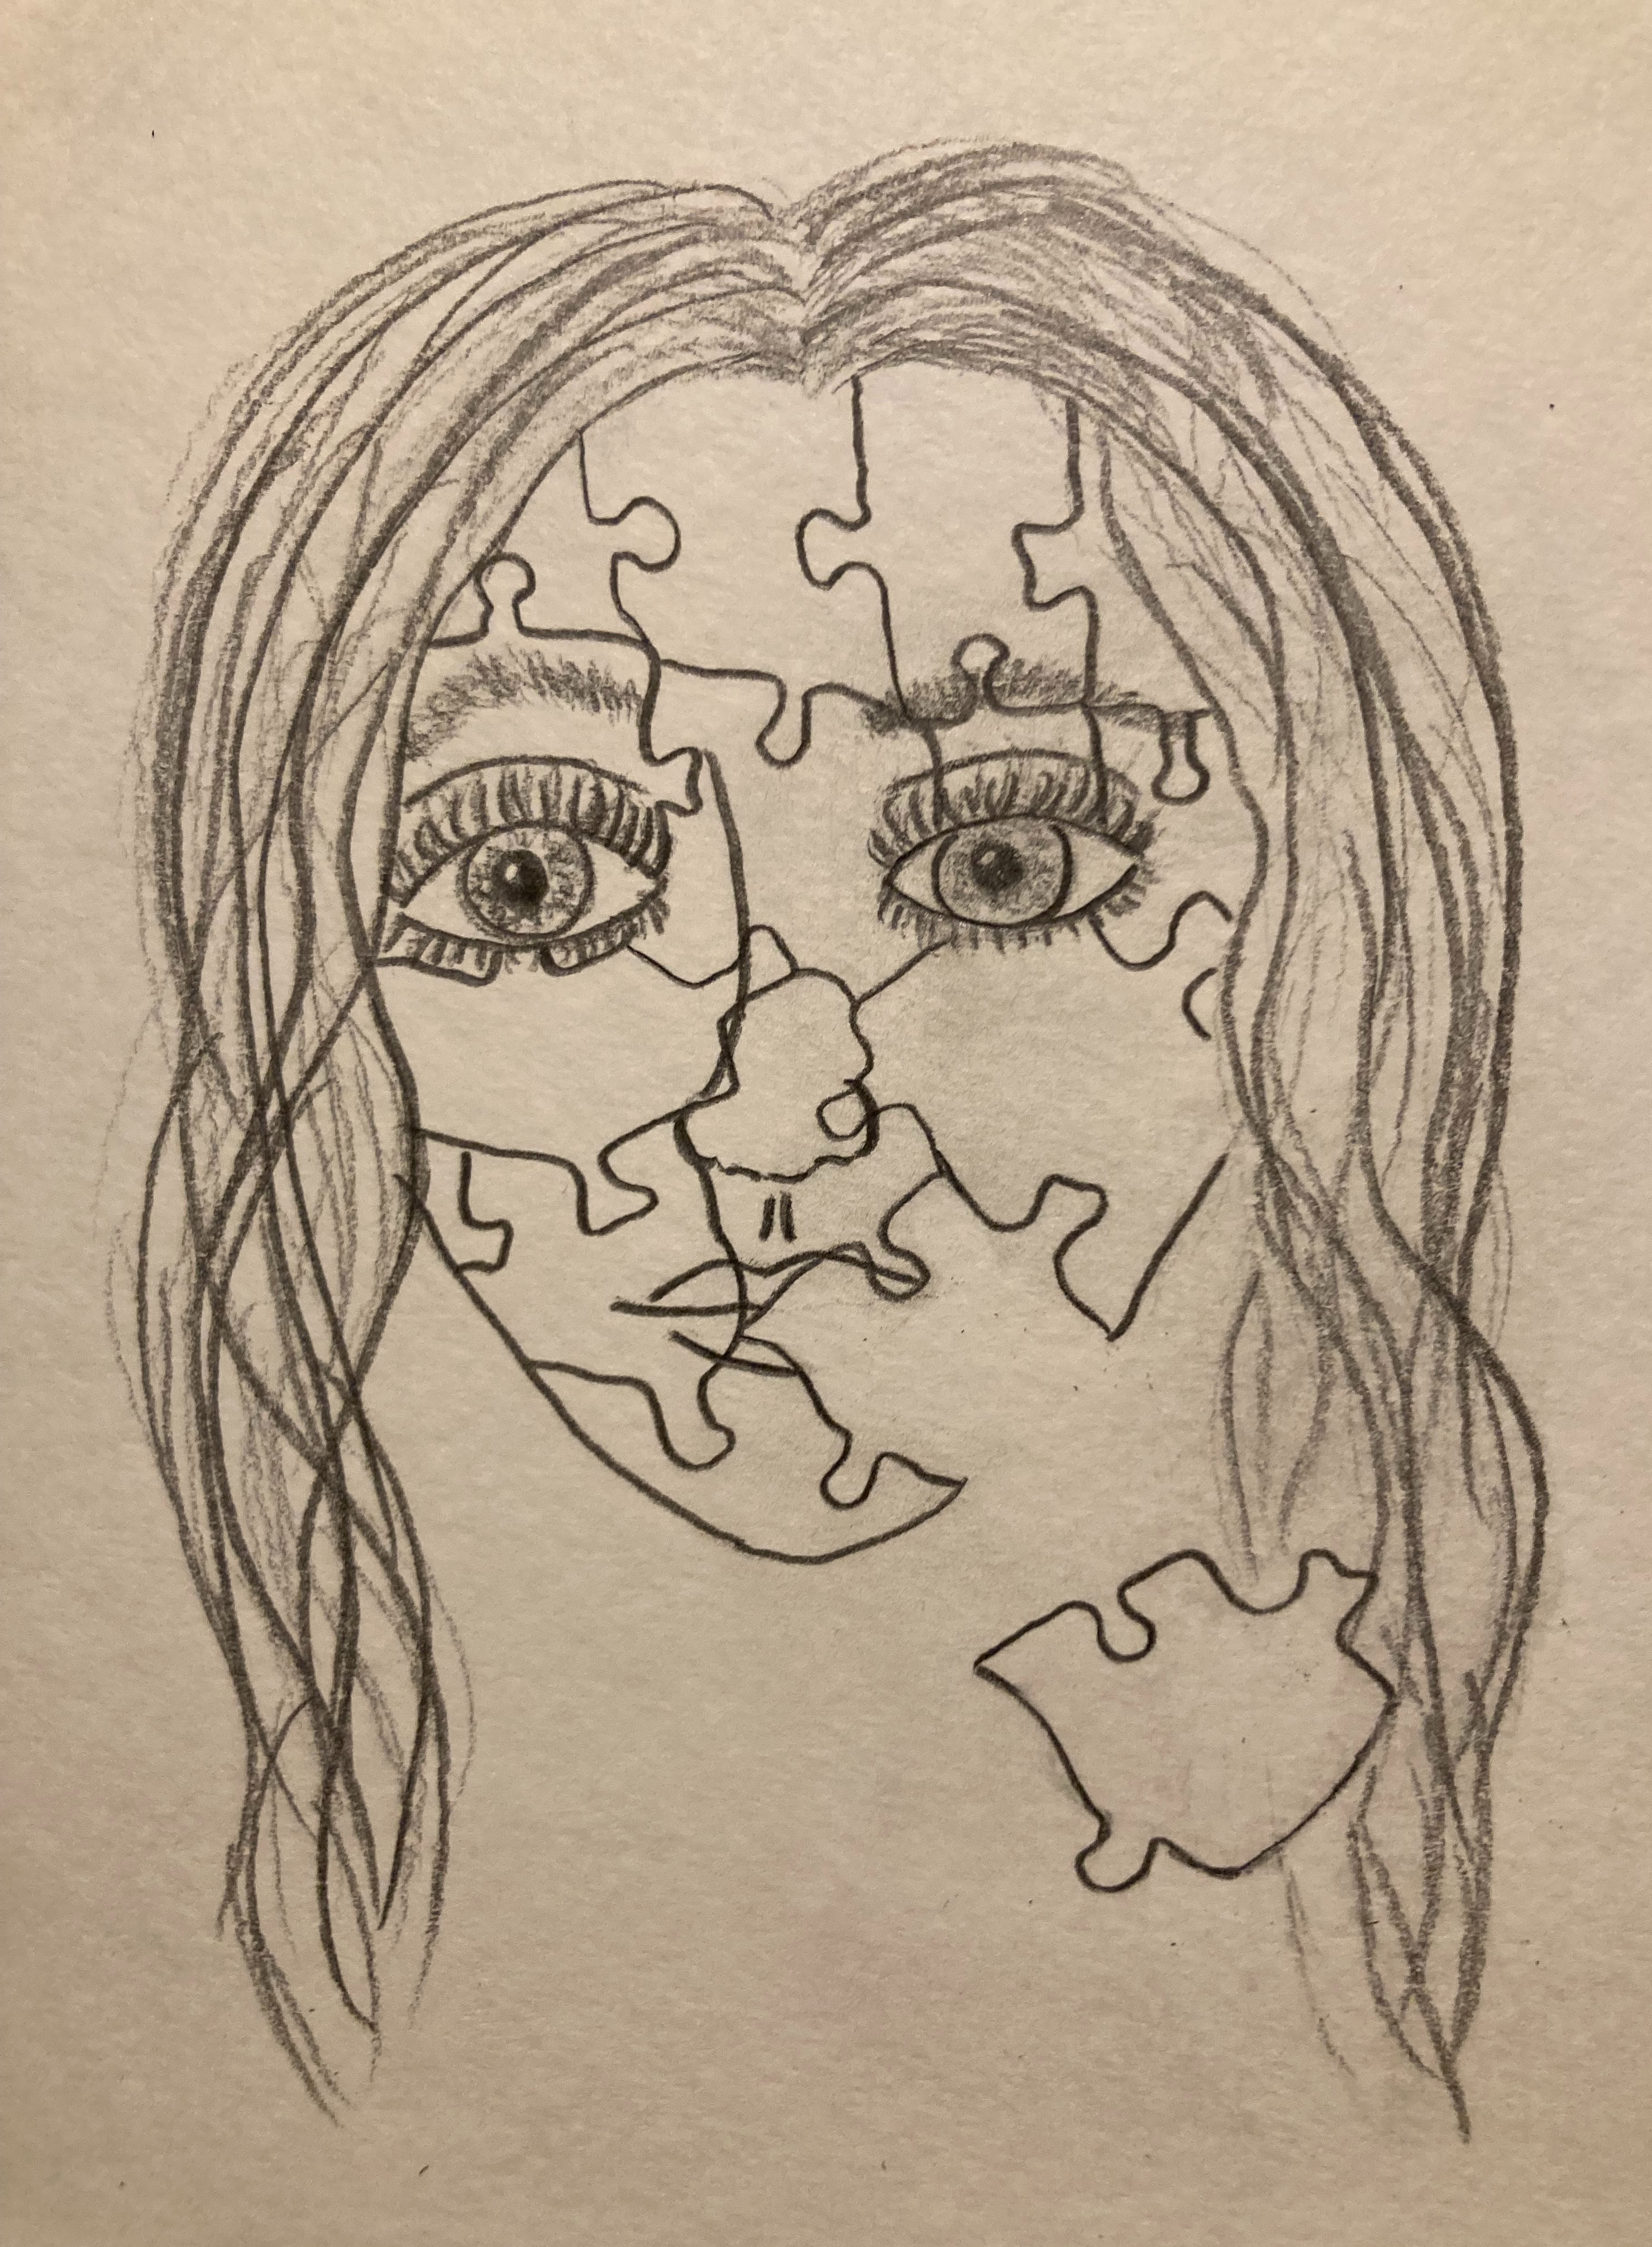 Pencil drawing of a girl's face made of a puzzle, one piece left to be places, representing the struggle of piecing yourself back together after a brain injury. 
"But I did, painfully, piece by piece."